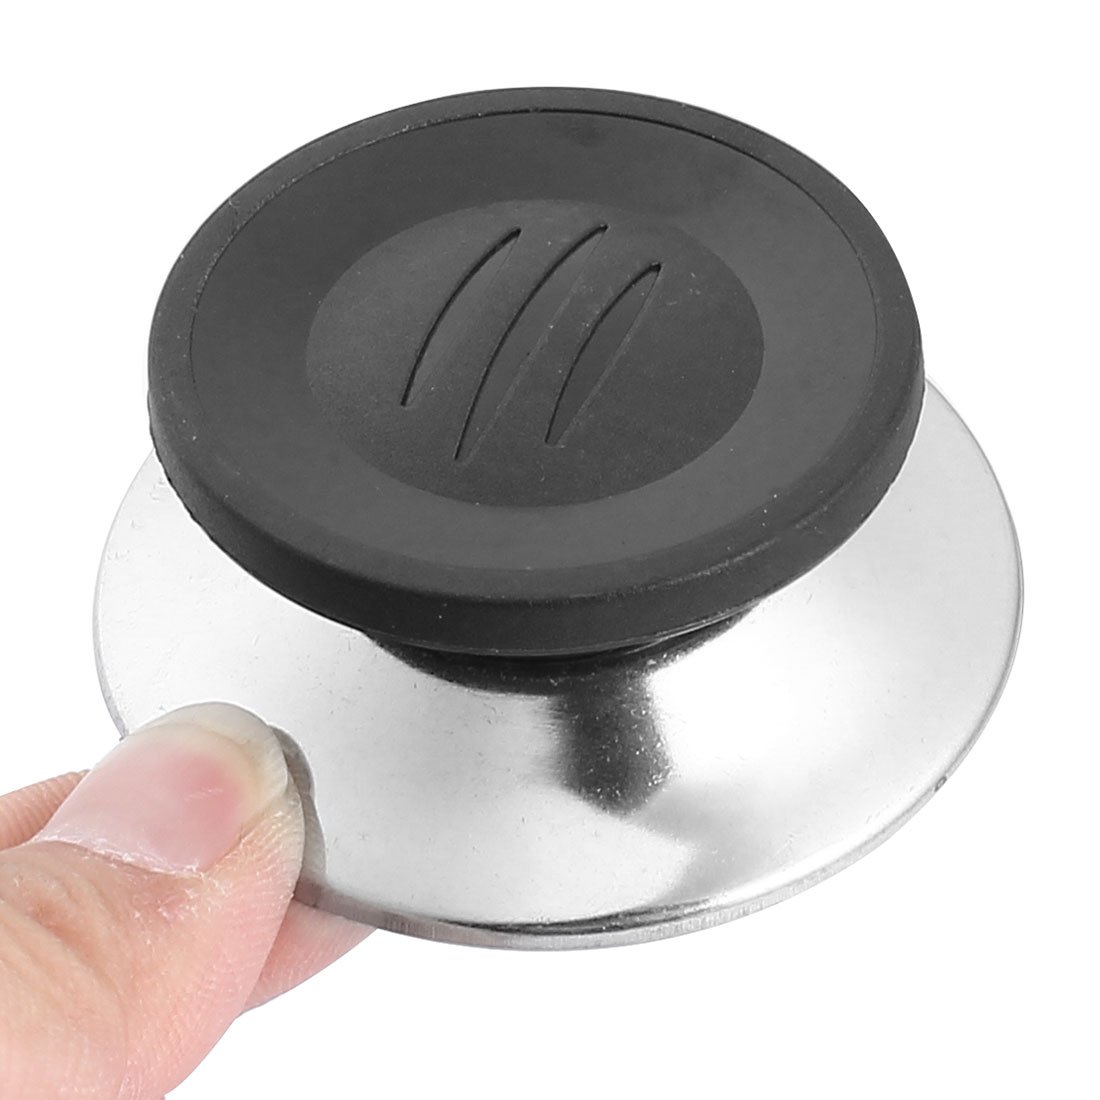 uxcell a17030700ux0108 Kitchen Round Cookware Replacement Skillet Stockpot Kettle Frying Pan Pot Handle Lid Cover Knob